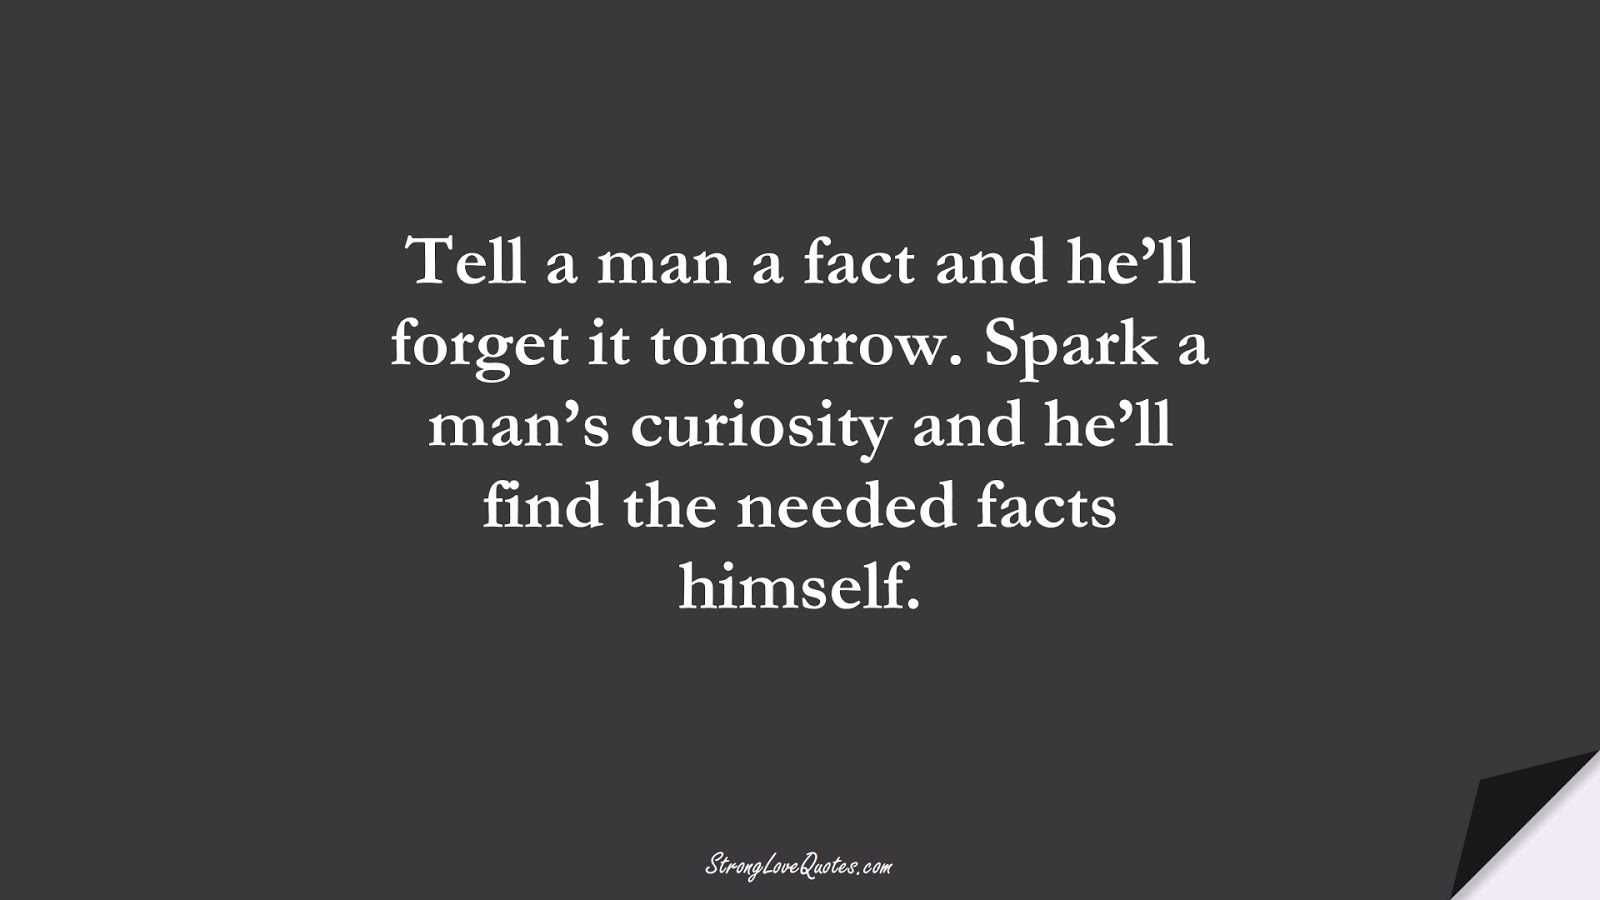 Tell a man a fact and he’ll forget it tomorrow. Spark a man’s curiosity and he’ll find the needed facts himself.FALSE